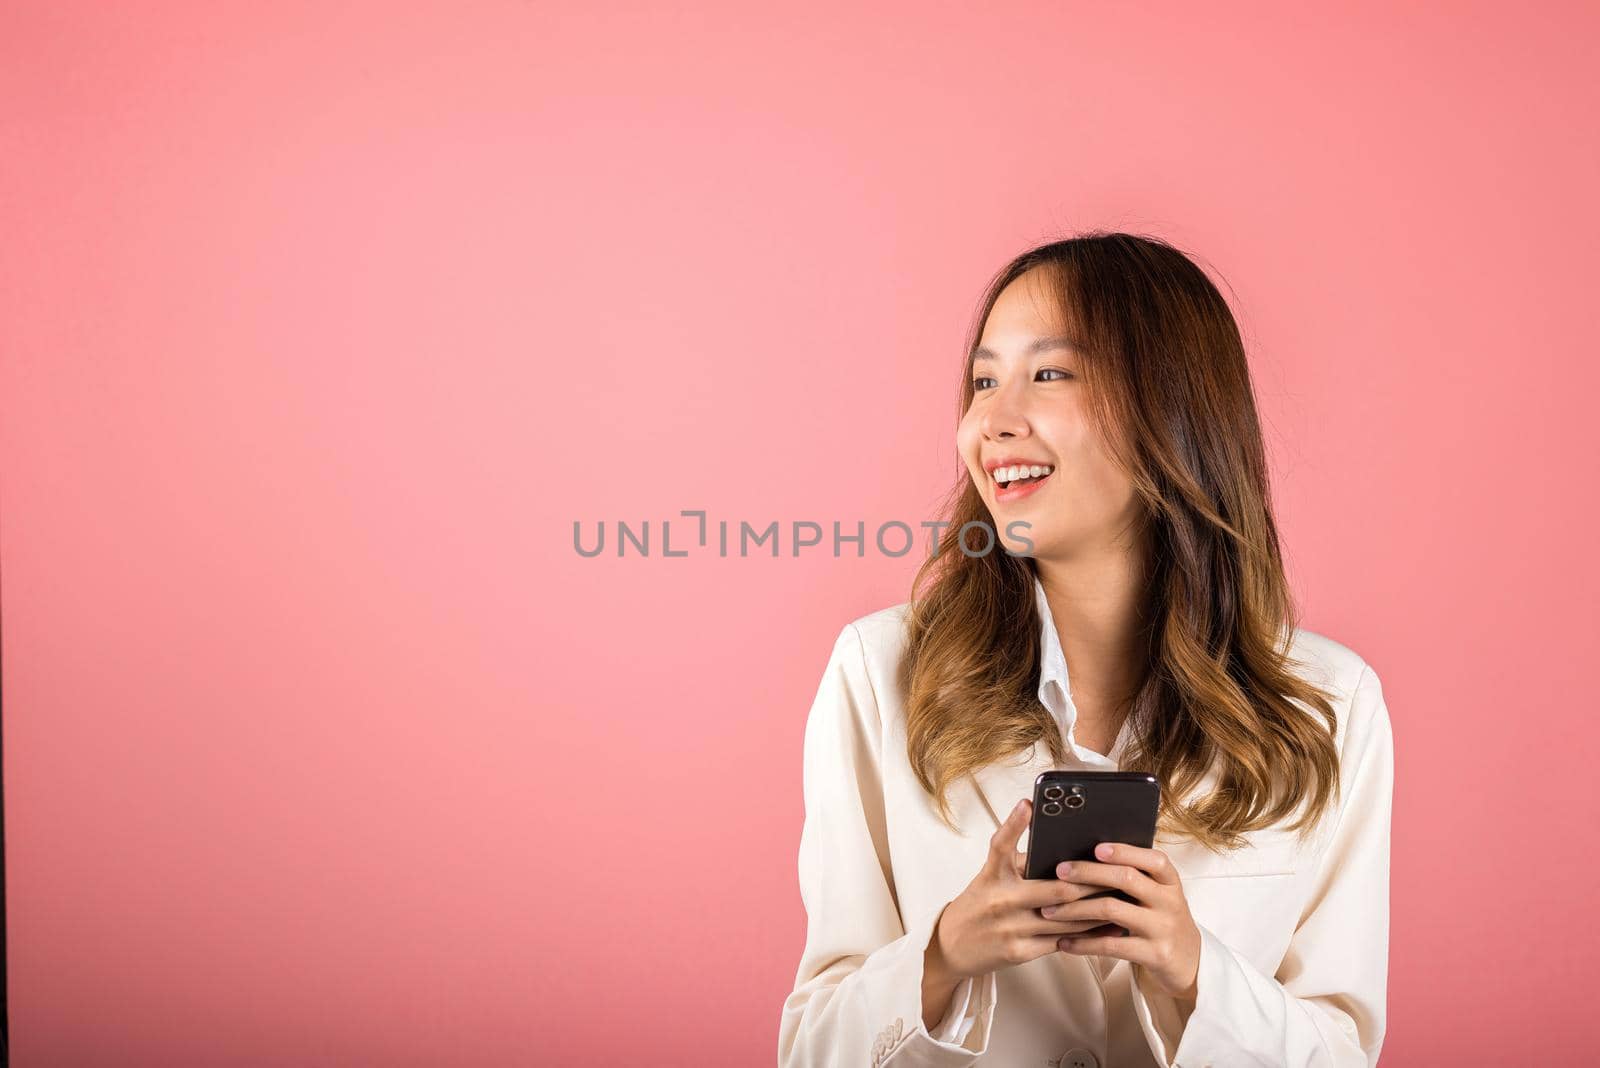 Female surprised and sms chatting internet online on smartphone studio shot isolated on pink background, Happy Asian portrait beautiful cute young woman teen smiling excited hold smart mobile phone